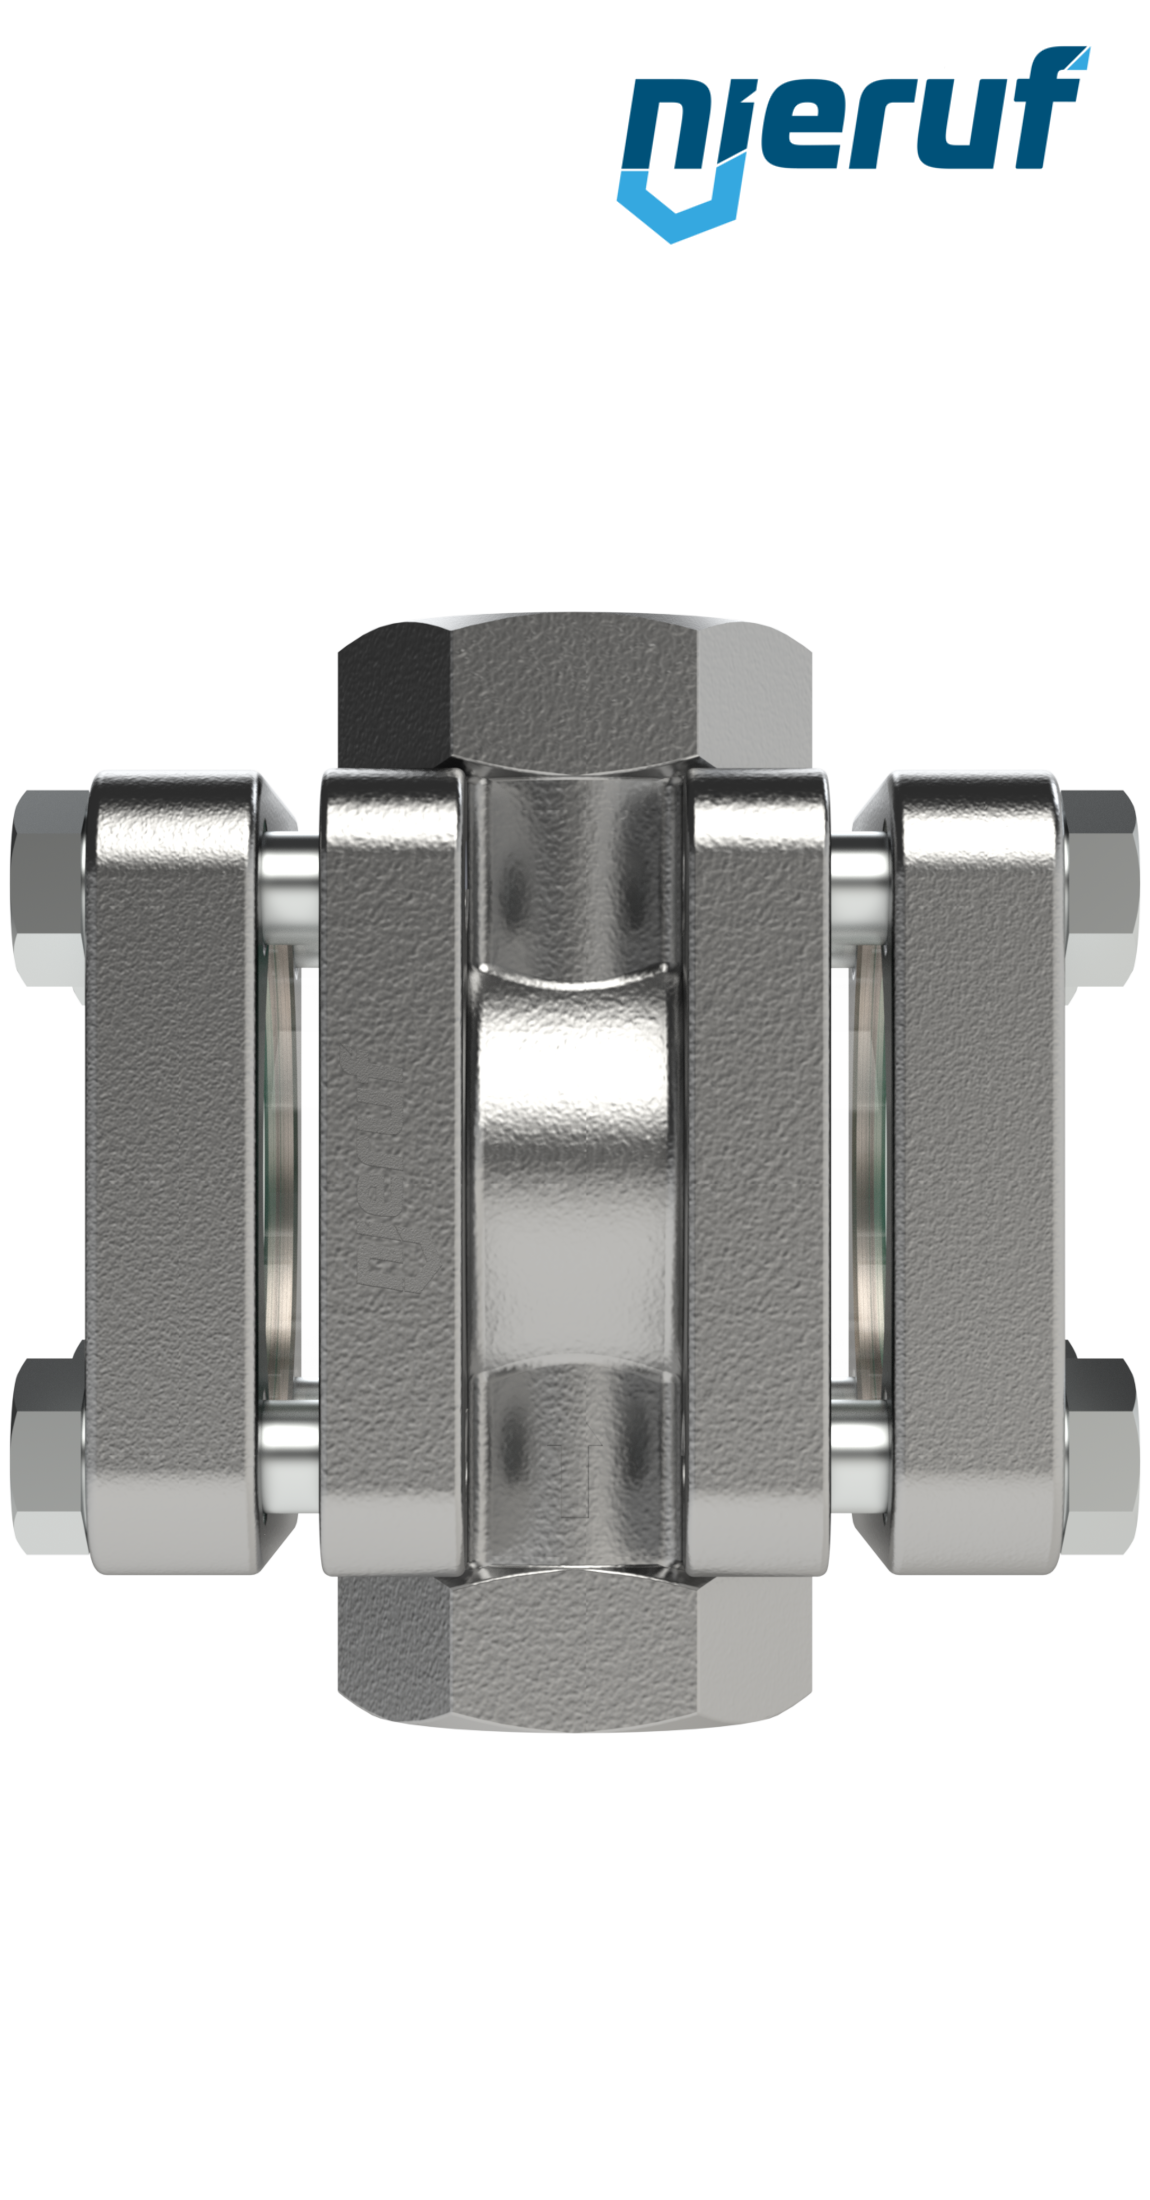 flow-through sight flow indicator DN32 - 1 1/4" inch stainless steel borosilicate glass